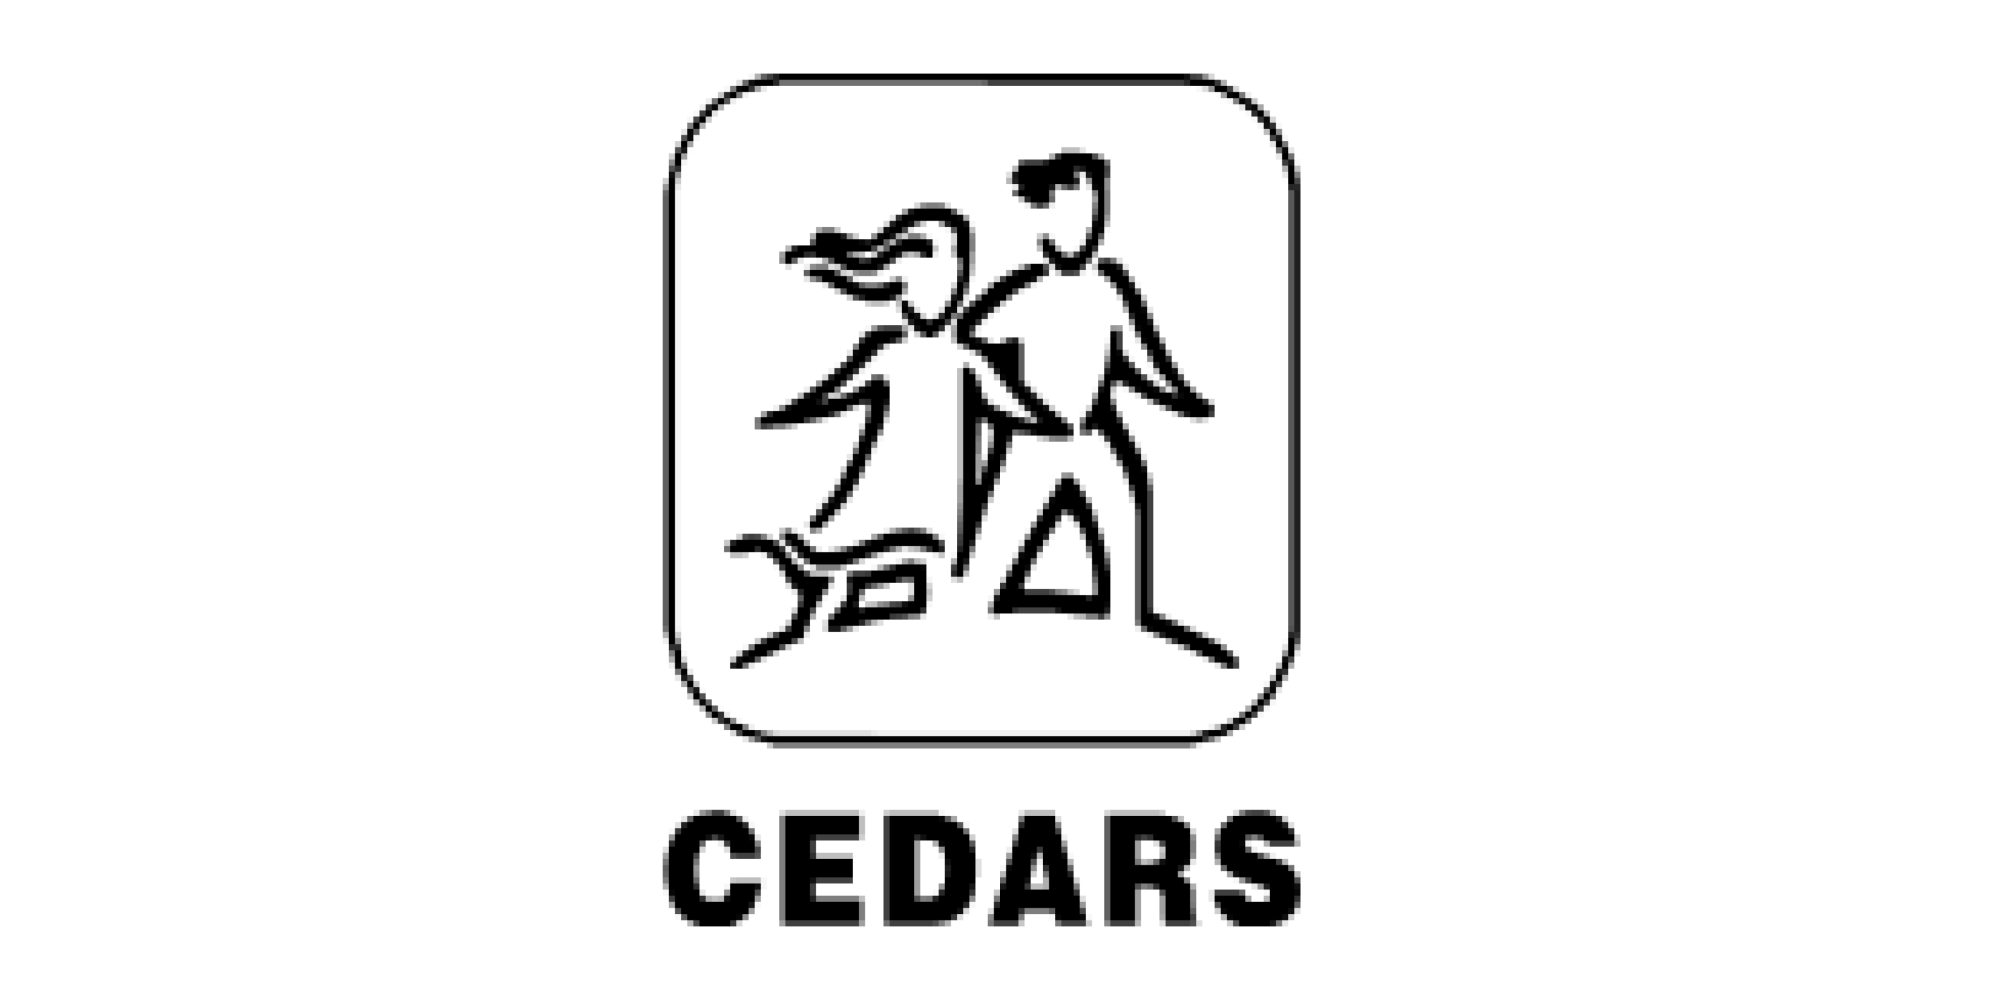 CEDARS Youth Services